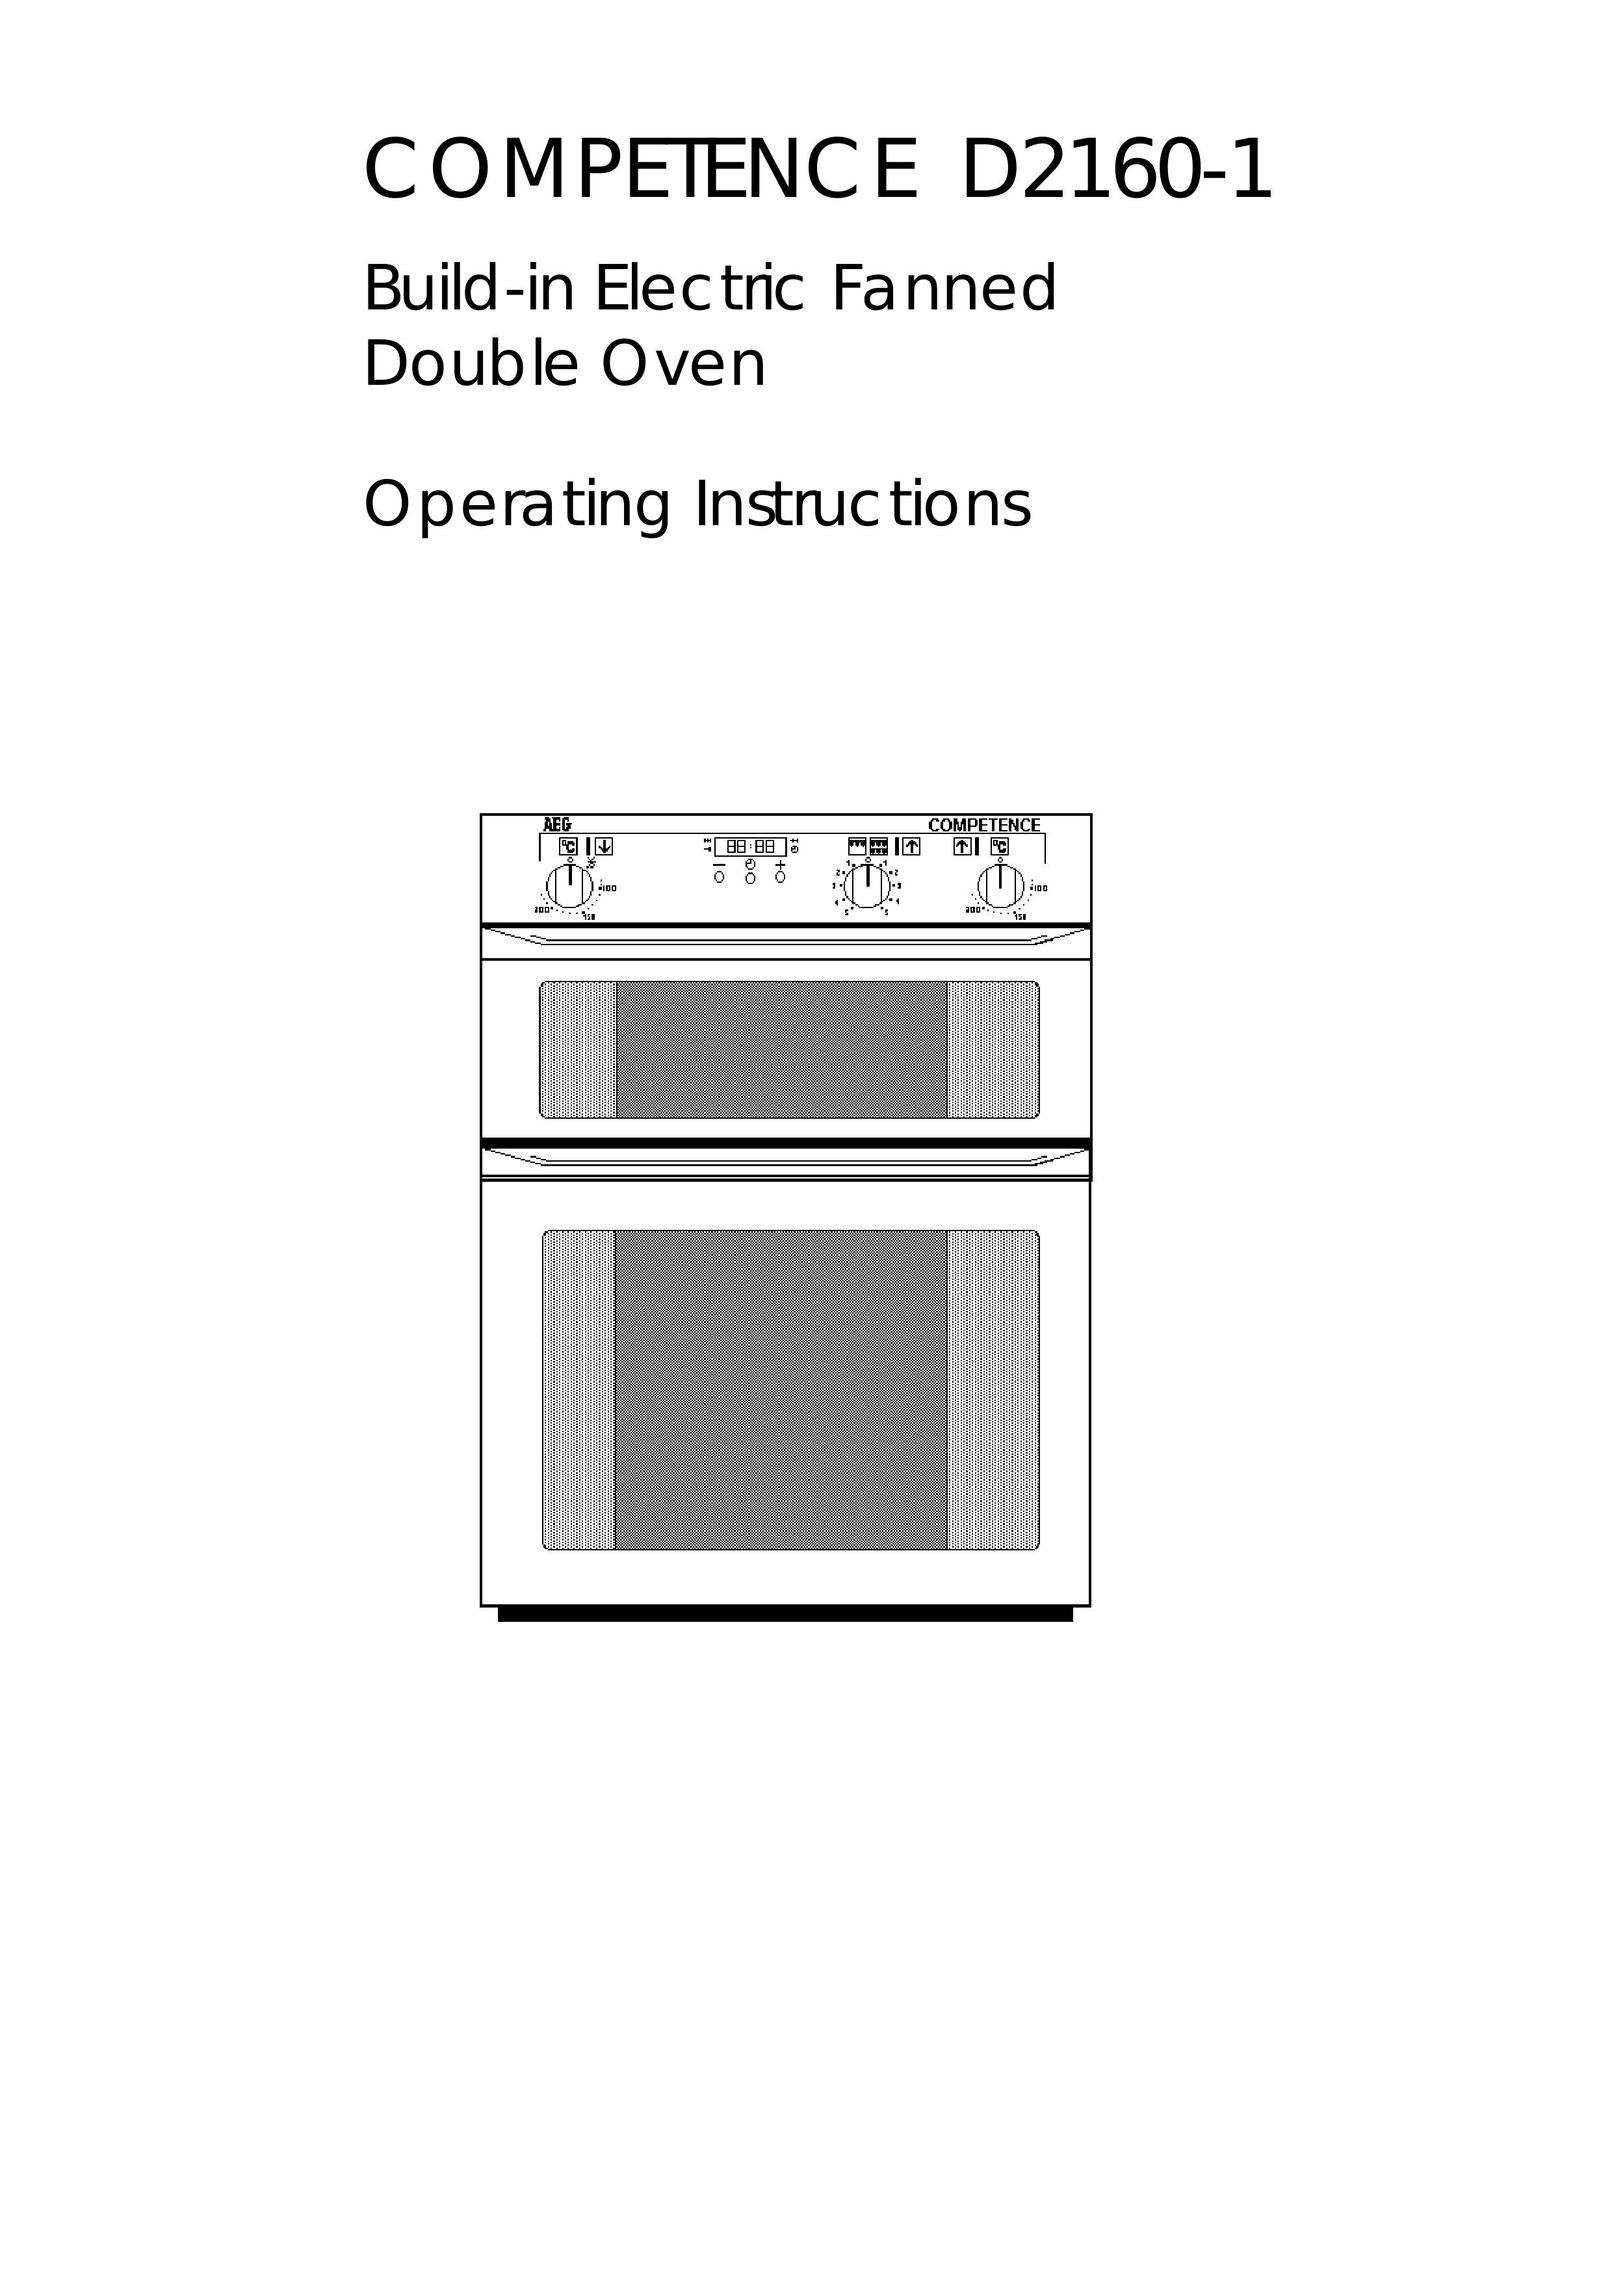 AEG D2160-1 Double Oven User Manual